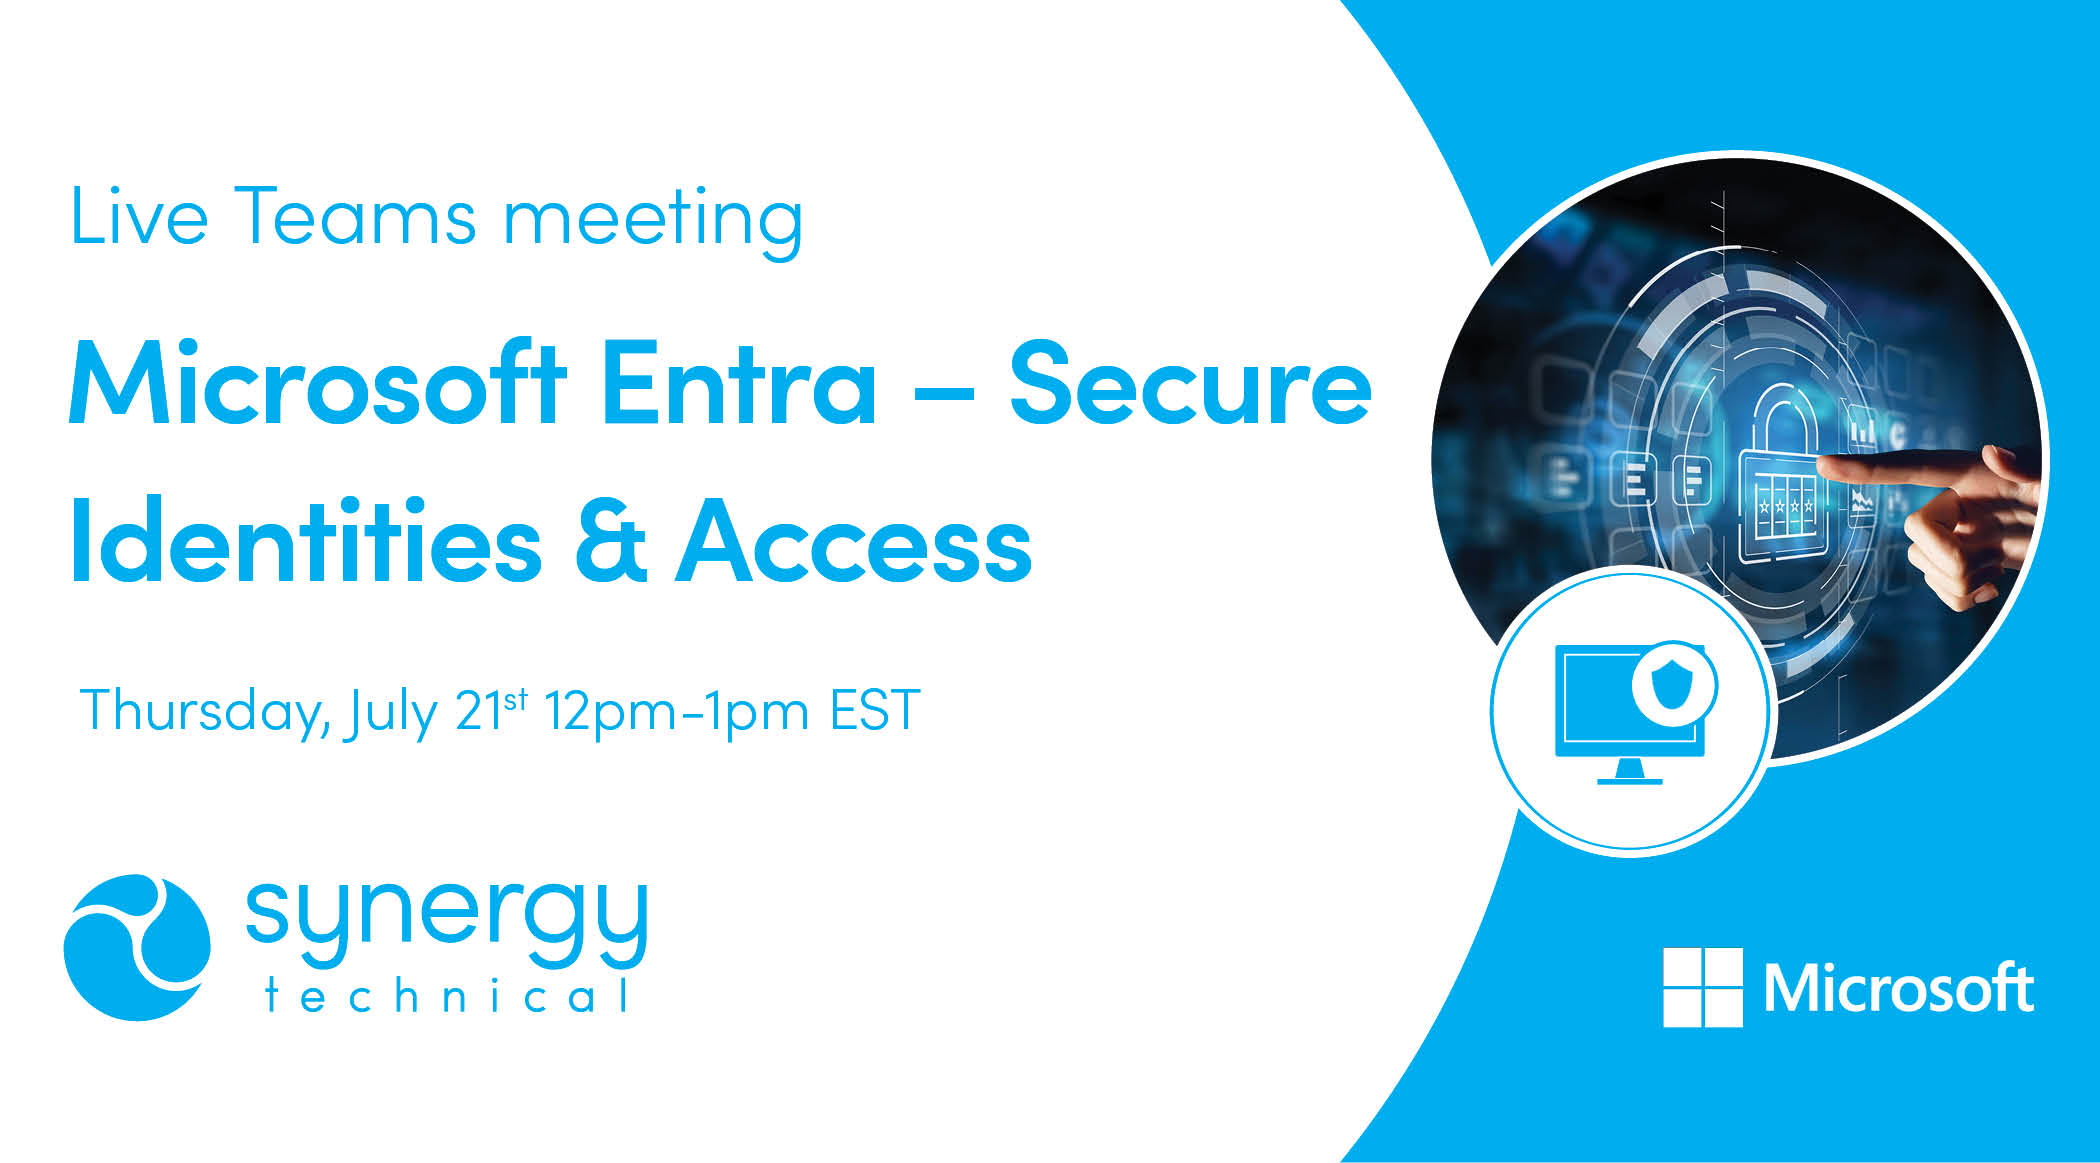 Microsoft Entra - Secure Identities & Access